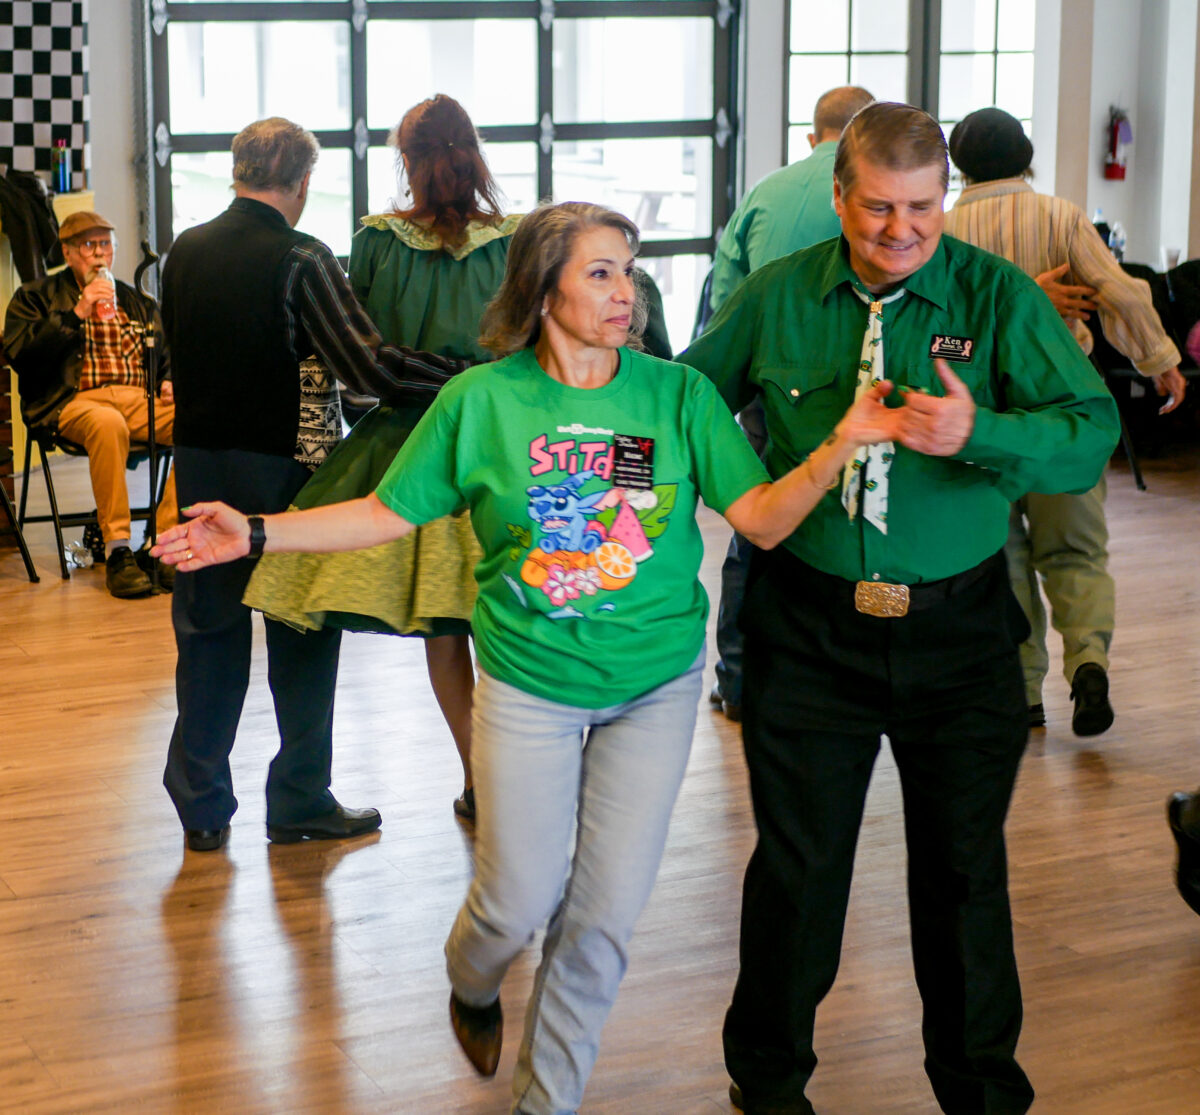 Sierra Hillbillies Lucky Leprechaun's Dance had attendees square dancing with multiple partners while Phil Farmer sang and called out square dancing movements for them to follow on Sunday at the Valencia United Methodist Church. Katherine Quezada/The Signal